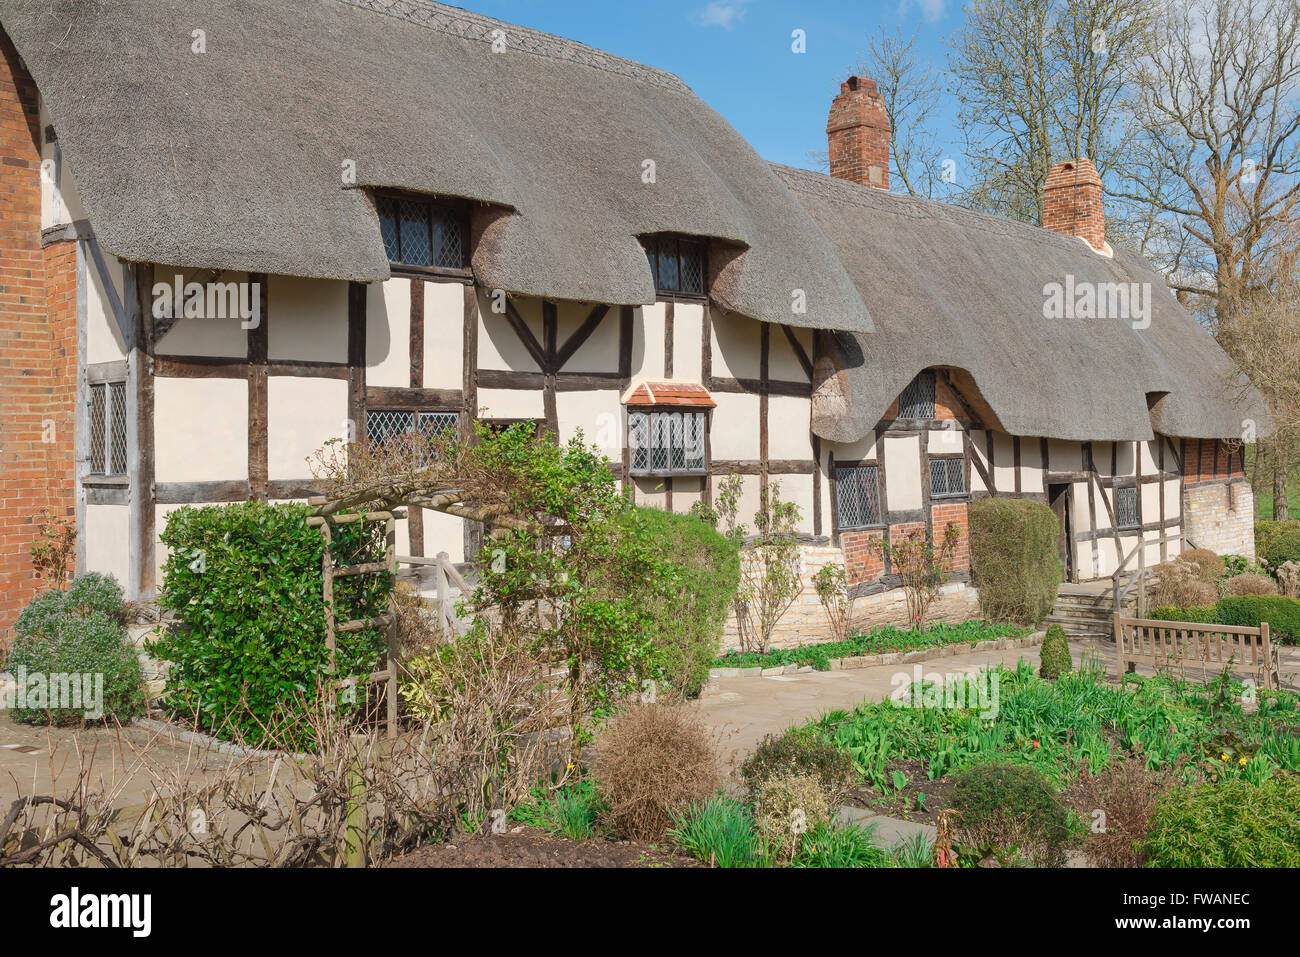 Typical English country cottage, view of Anne Hathaway's Cottage and garden in Shotley, near Stratford Upon Avon, England, UK Stock Photo